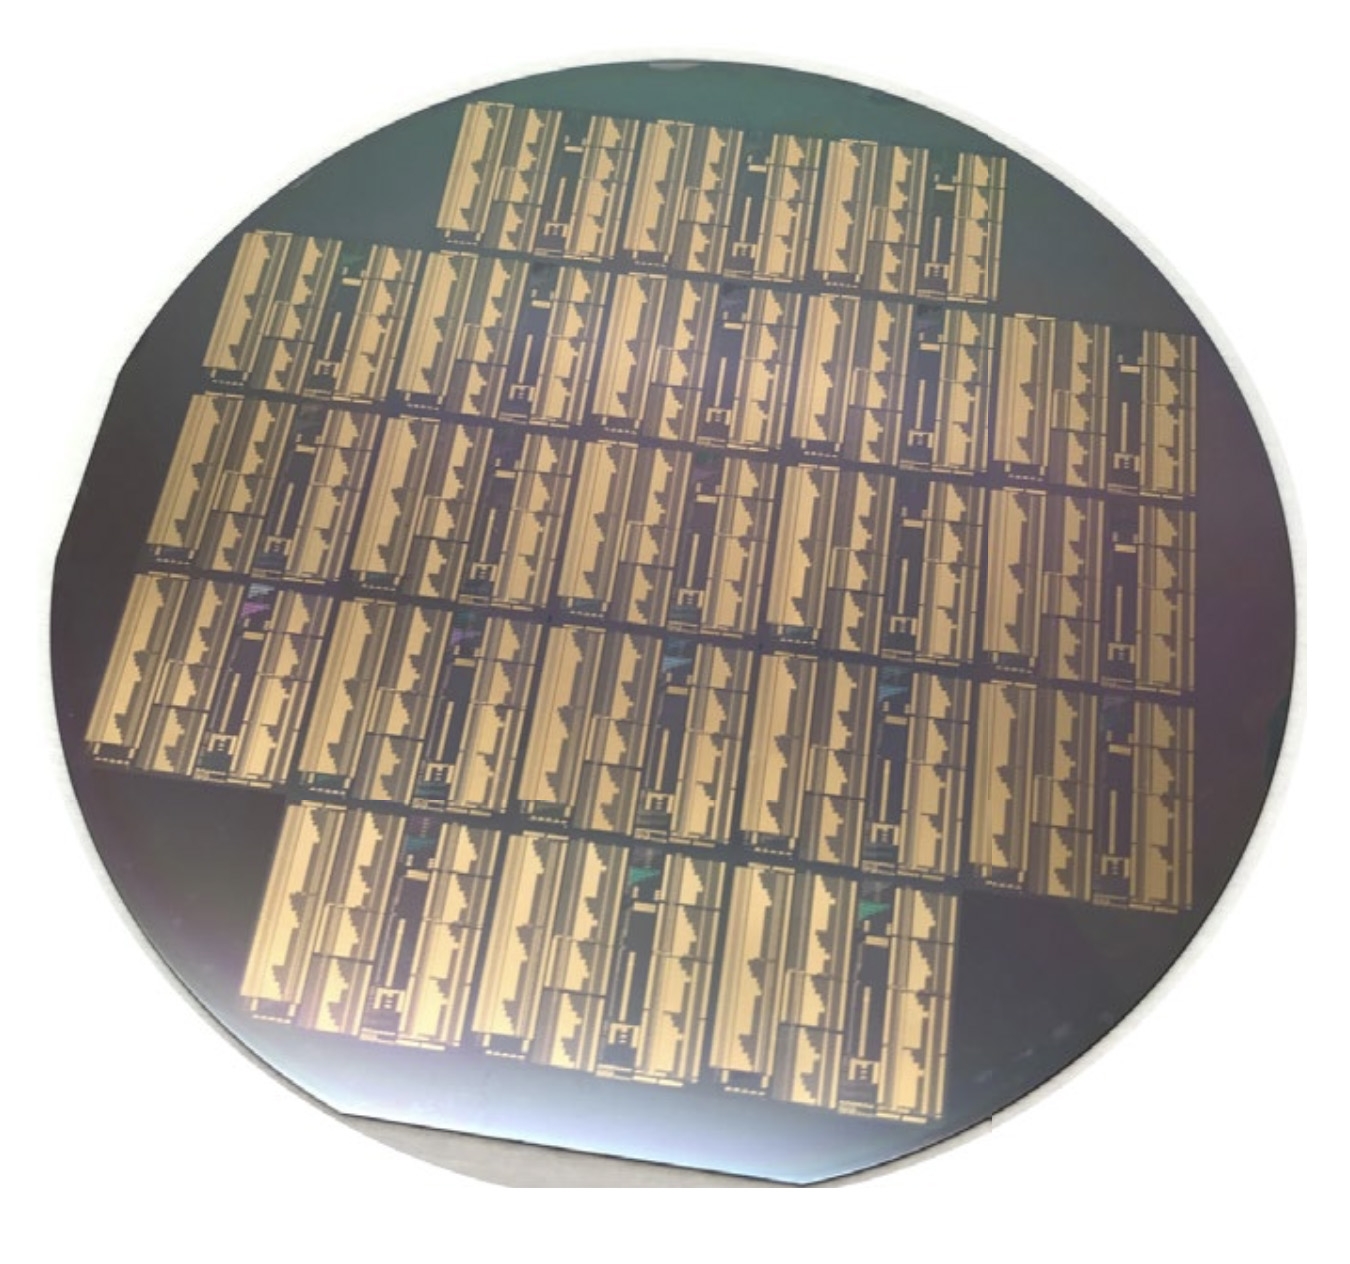 A 4-inch wafer